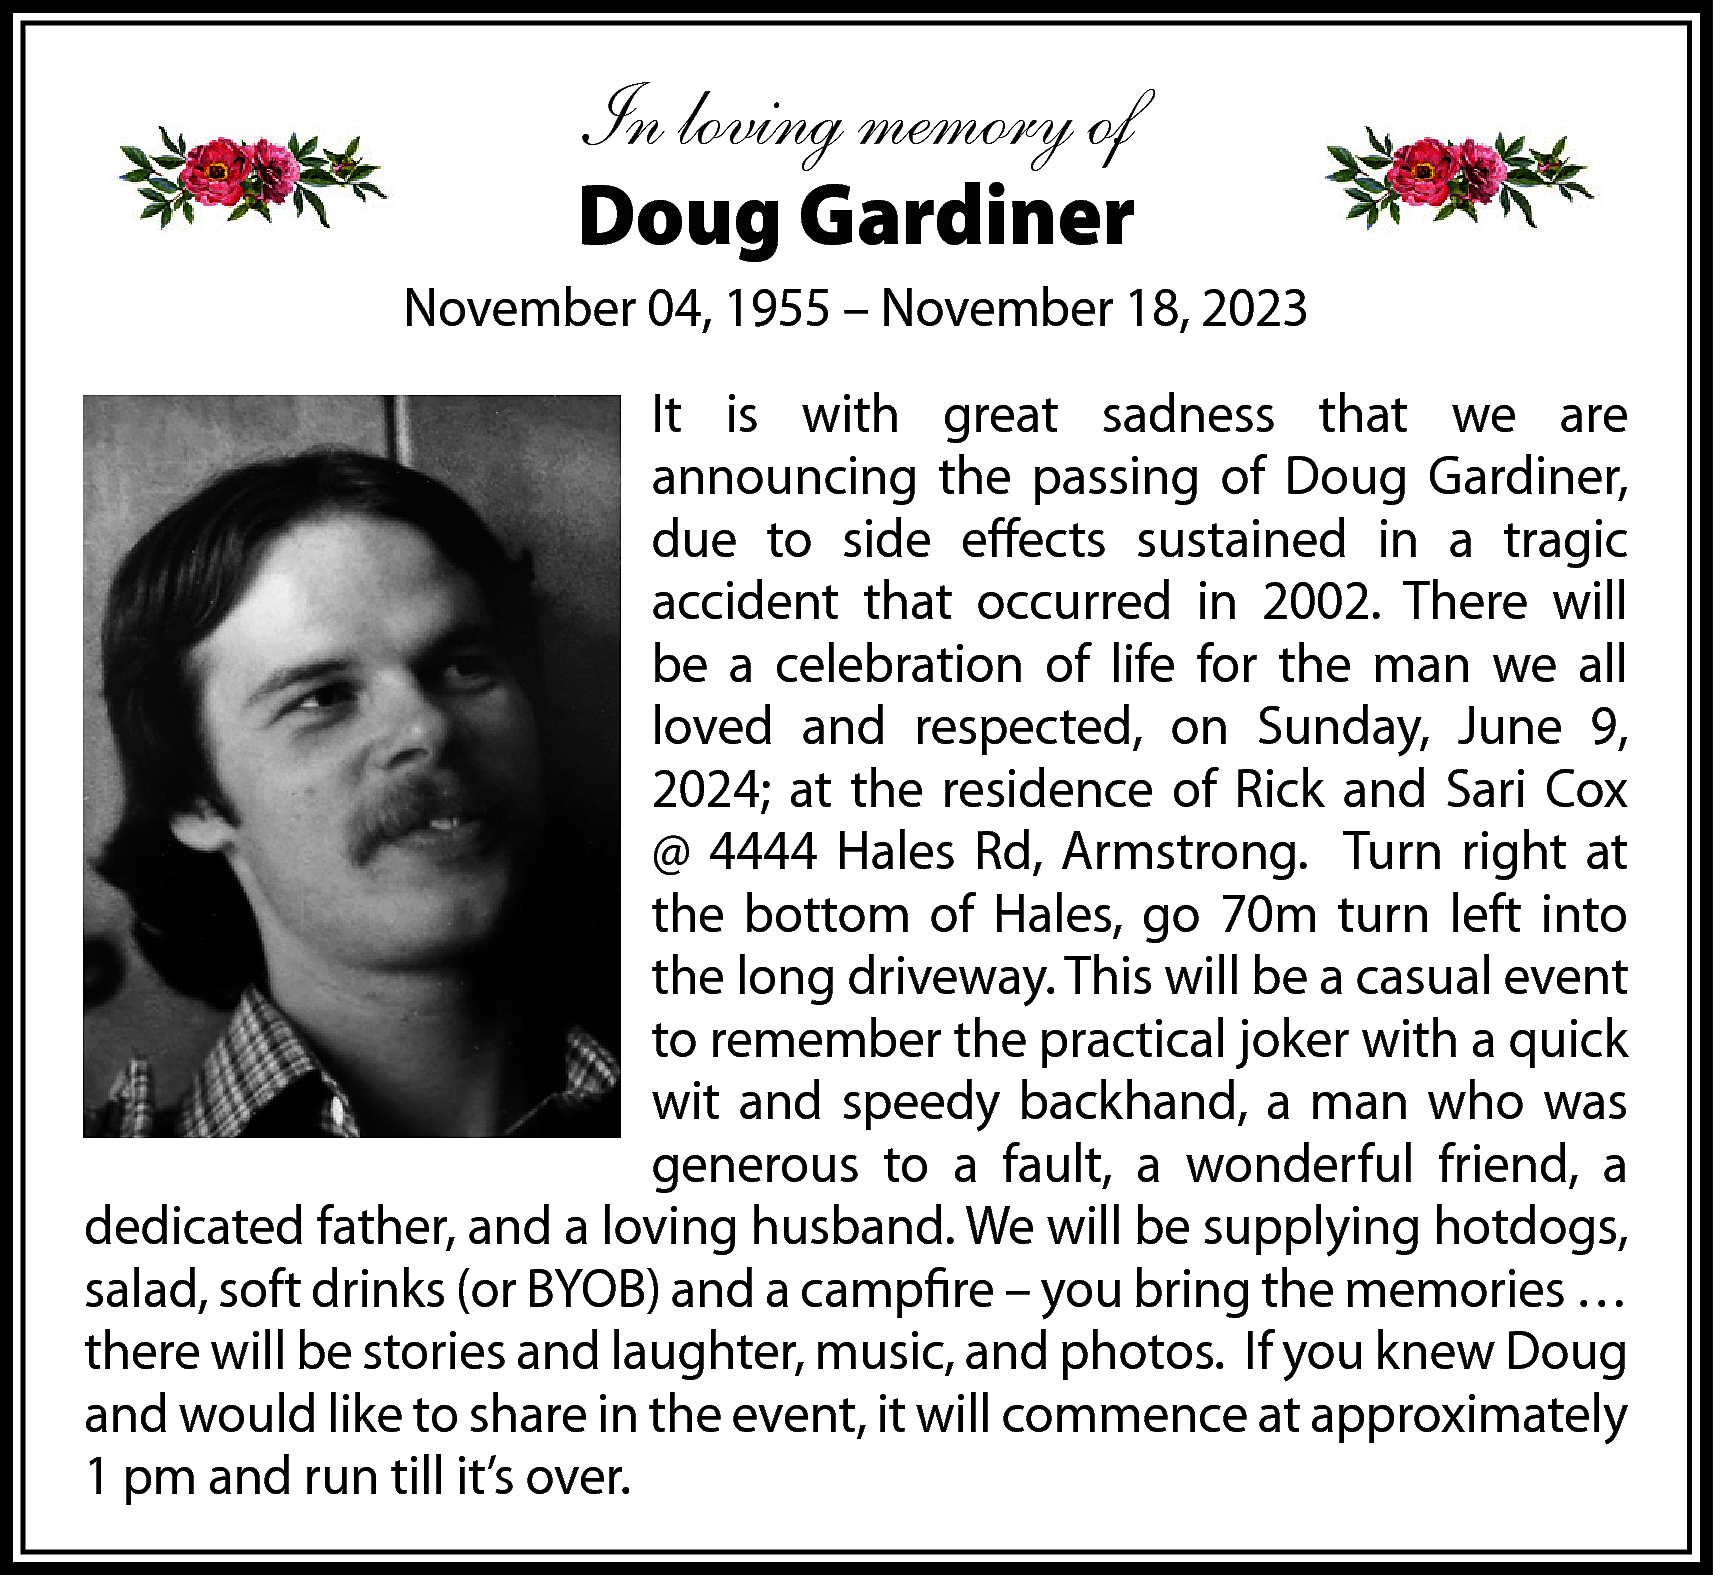 In loving memory of <br>Doug  In loving memory of  Doug Gardiner  November 04, 1955 – November 18, 2023  It is with great sadness that we are  announcing the passing of Doug Gardiner,  due to side effects sustained in a tragic  accident that occurred in 2002. There will  be a celebration of life for the man we all  loved and respected, on Sunday, June 9,  2024; at the residence of Rick and Sari Cox  @ 4444 Hales Rd, Armstrong. Turn right at  the bottom of Hales, go 70m turn left into  the long driveway. This will be a casual event  to remember the practical joker with a quick  wit and speedy backhand, a man who was  generous to a fault, a wonderful friend, a  dedicated father, and a loving husband. We will be supplying hotdogs,  salad, soft drinks (or BYOB) and a campfire – you bring the memories …  there will be stories and laughter, music, and photos. If you knew Doug  and would like to share in the event, it will commence at approximately  1 pm and run till it’s over.    